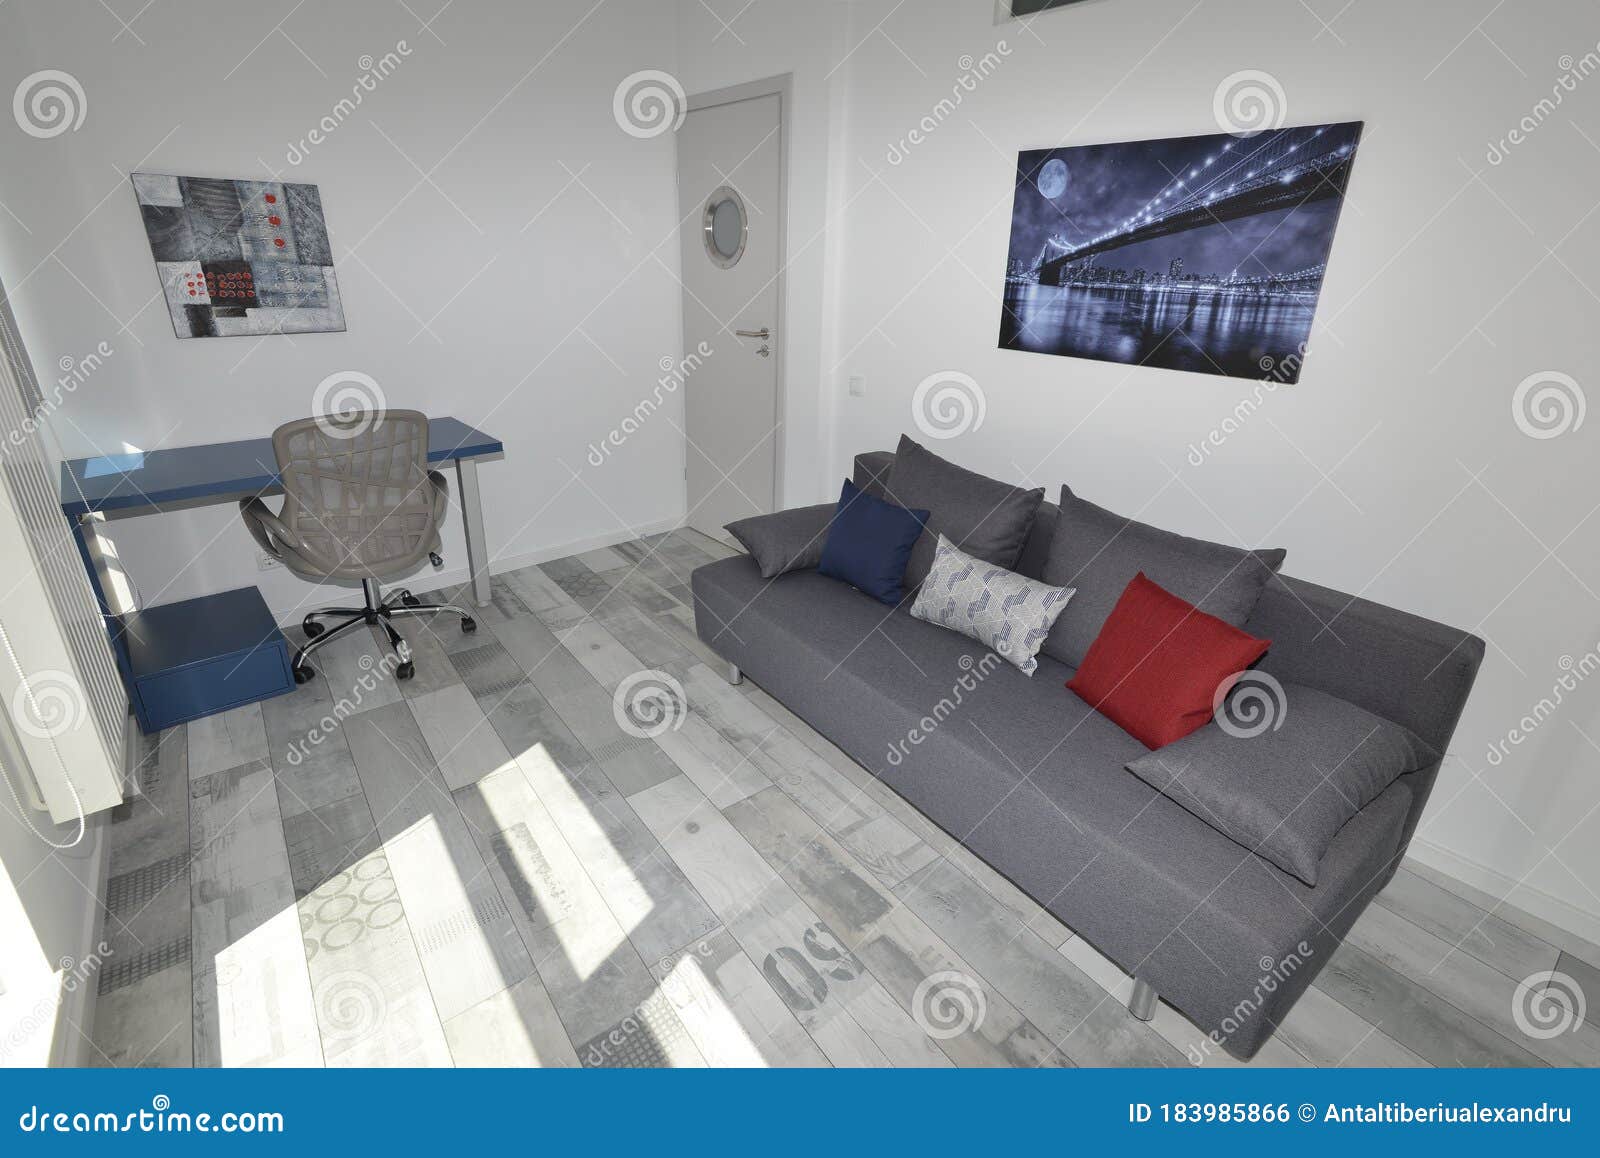 Small Living Room With Sofa And Work Desk Stock Photo Image Of Model